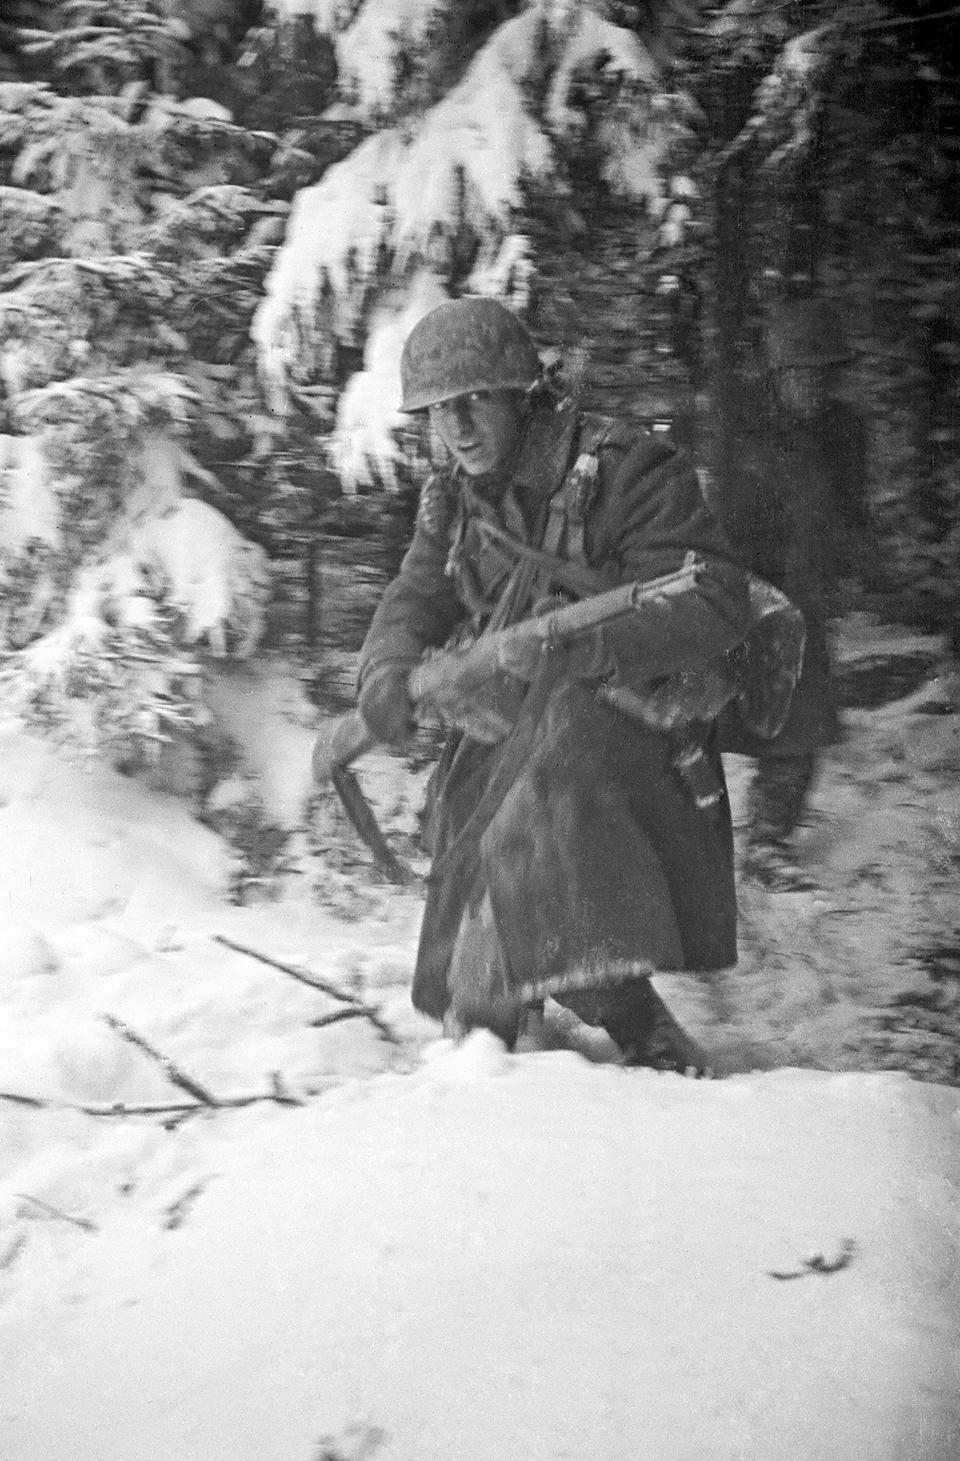 In this 1944 photo titled "Hell In Hurtgen" by photographer Tony Vaccaro, shows an American soldier in Germany's Hurtgen Forest. Vaccaro, 97, was thrown into WWII with the 83rd Infantry division which fought, like Charles Shay, in Normandy, and then came to Schmetz's doorstep for the Battle of the Bulge. On top of his military gear, he also carried a camera, and became a fashion and celebrity photographer after the war. COVID-19 caught up with him last month. Like everything bad life threw at him, he shook it off, attributing his survival to plain "fortune." (Photo courtesy Tony Vaccaro via AP)